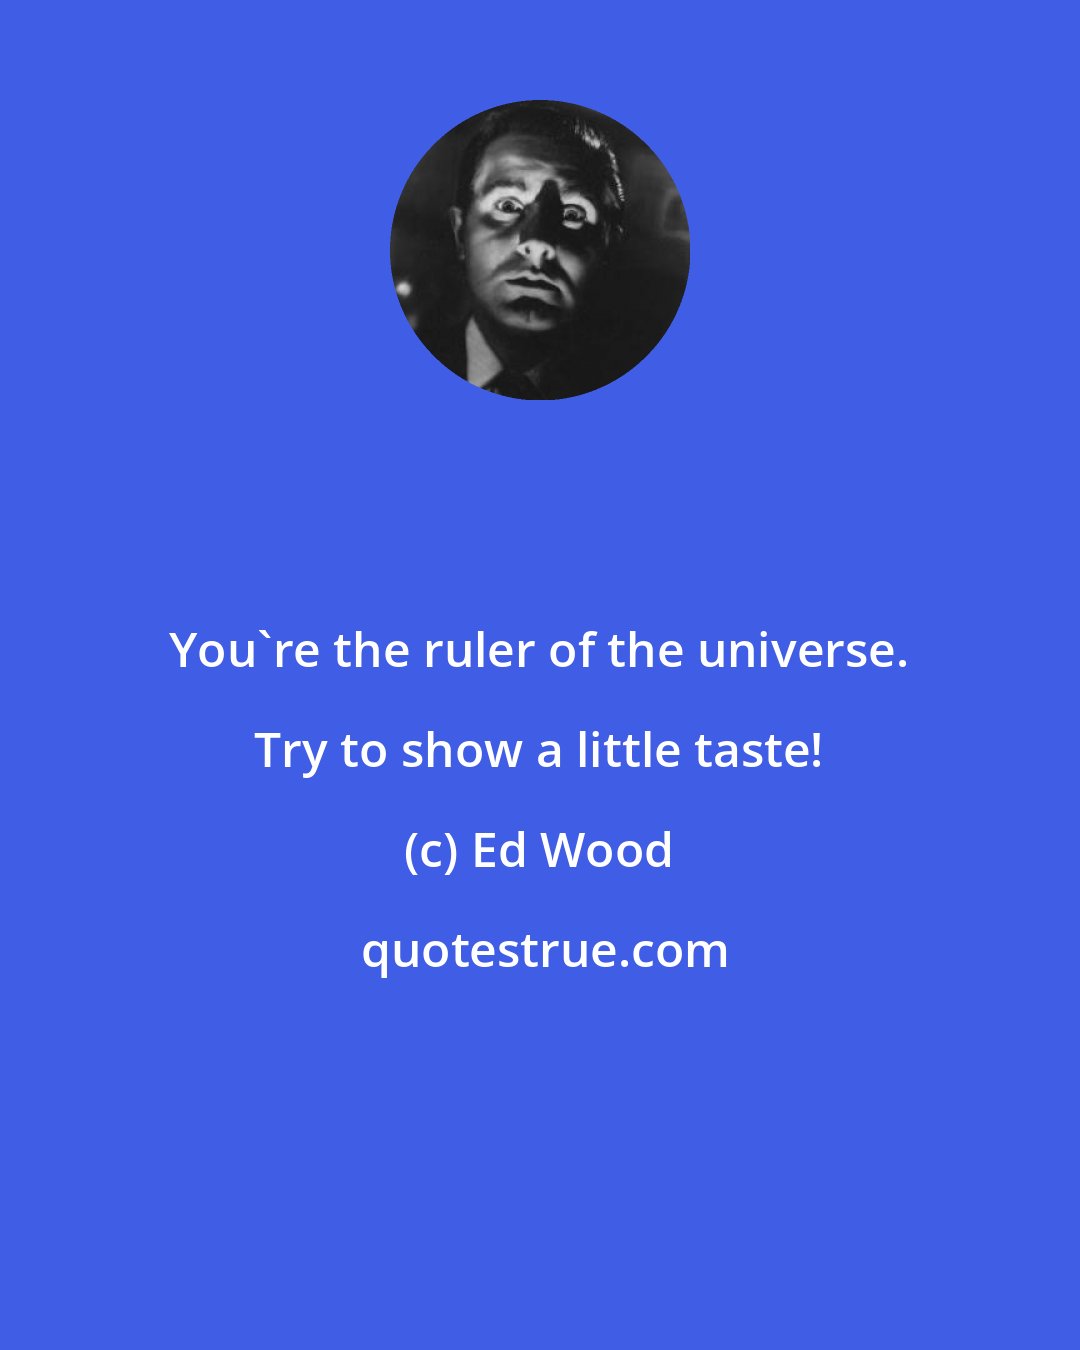 Ed Wood: You're the ruler of the universe. Try to show a little taste!